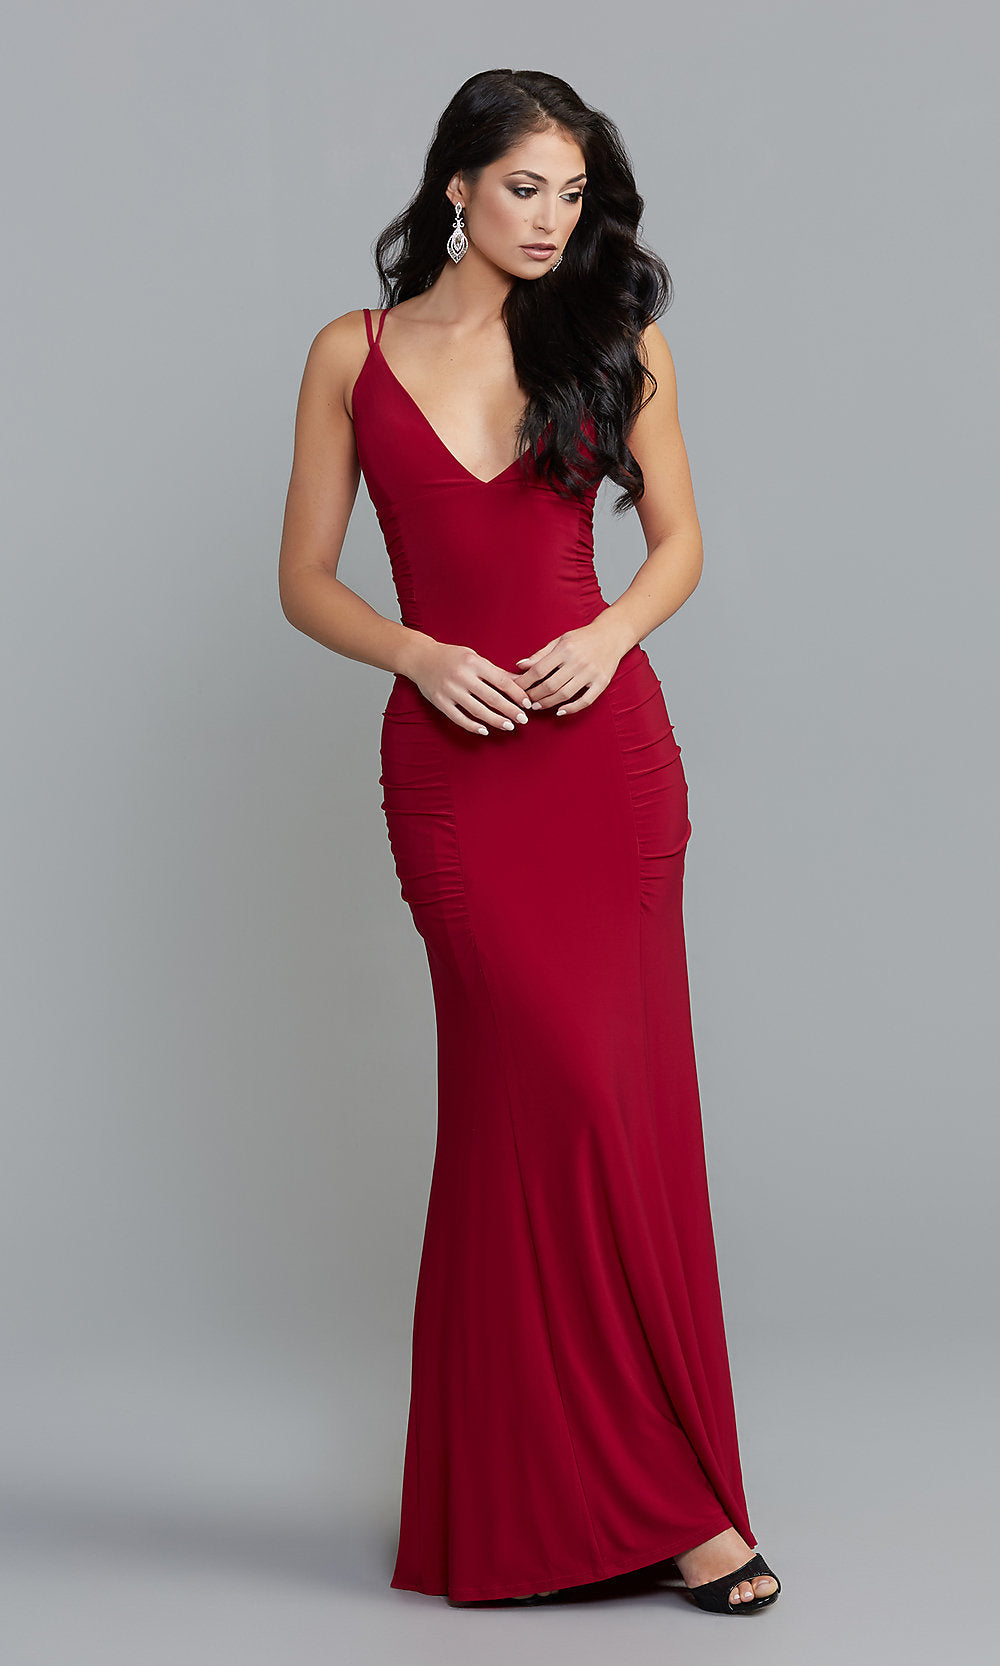 Skim Pygmalion global Jump Tight Side-Ruched Long Red Prom Dress - PromGirl